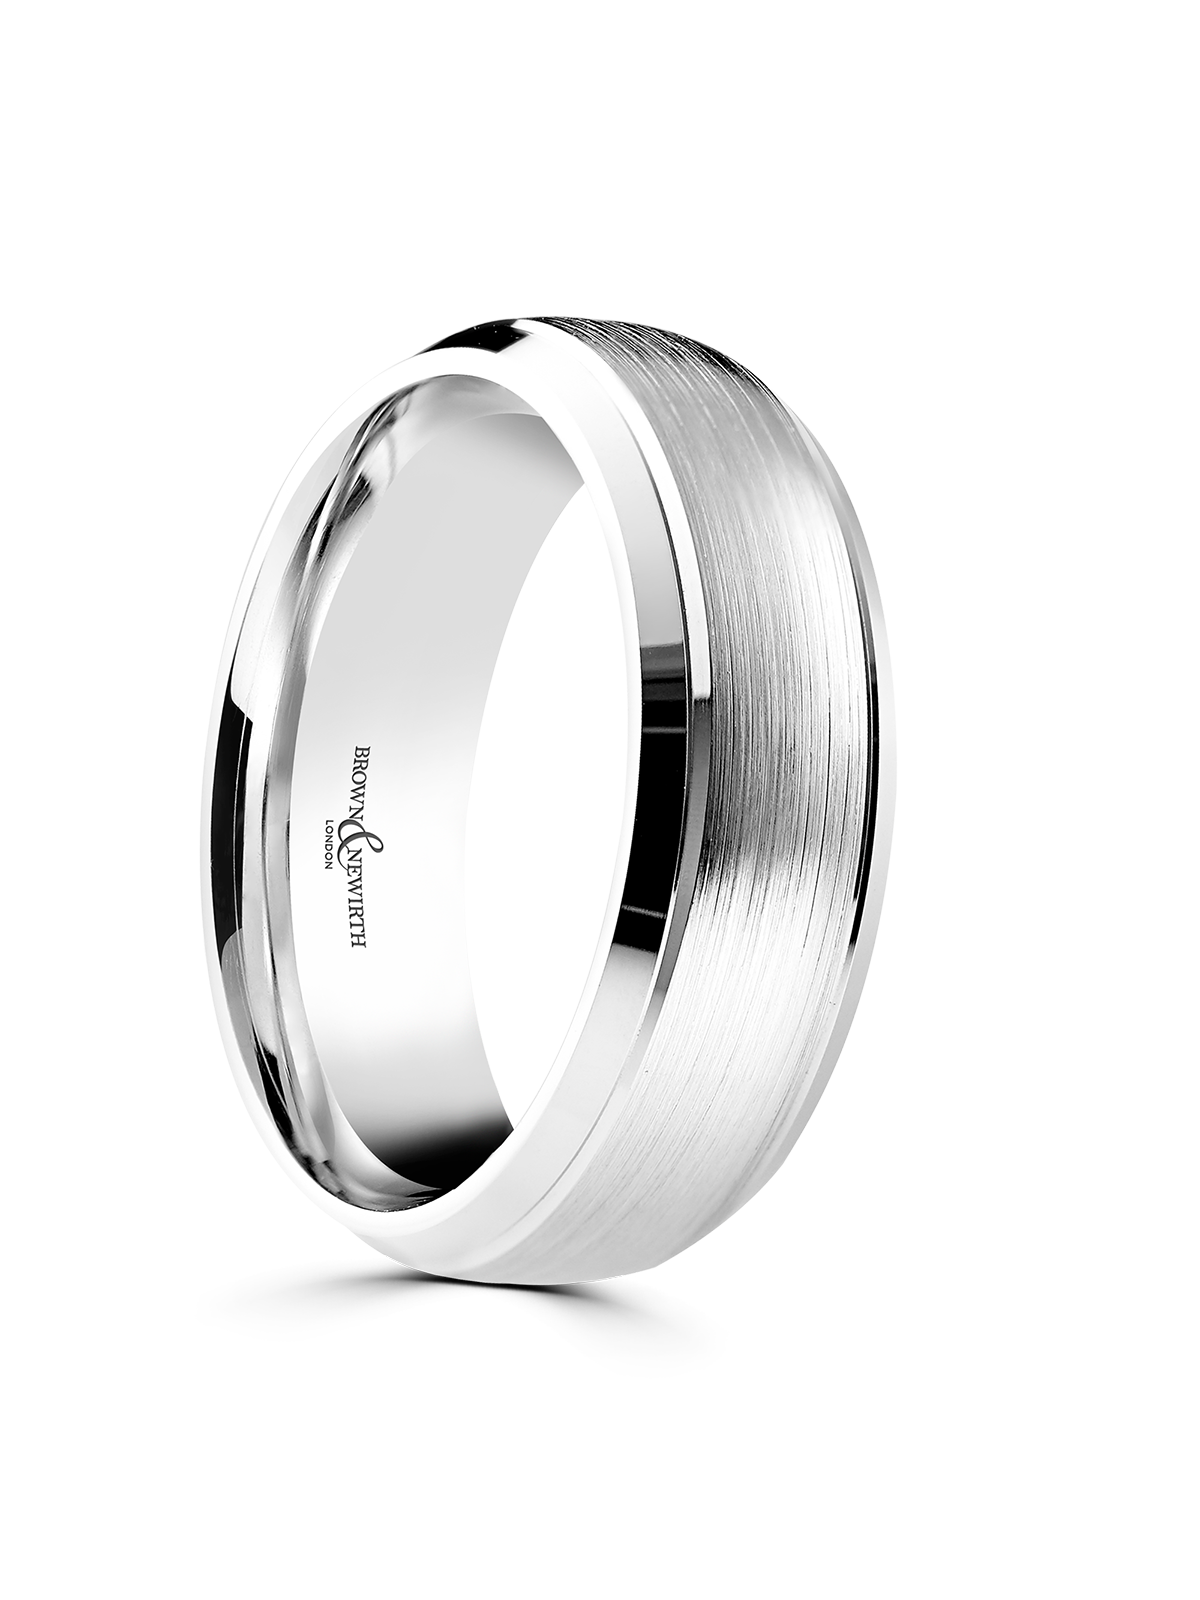 Brown & Newirth Element 3mm Patterned Wedding Ring in 9ct White Gold